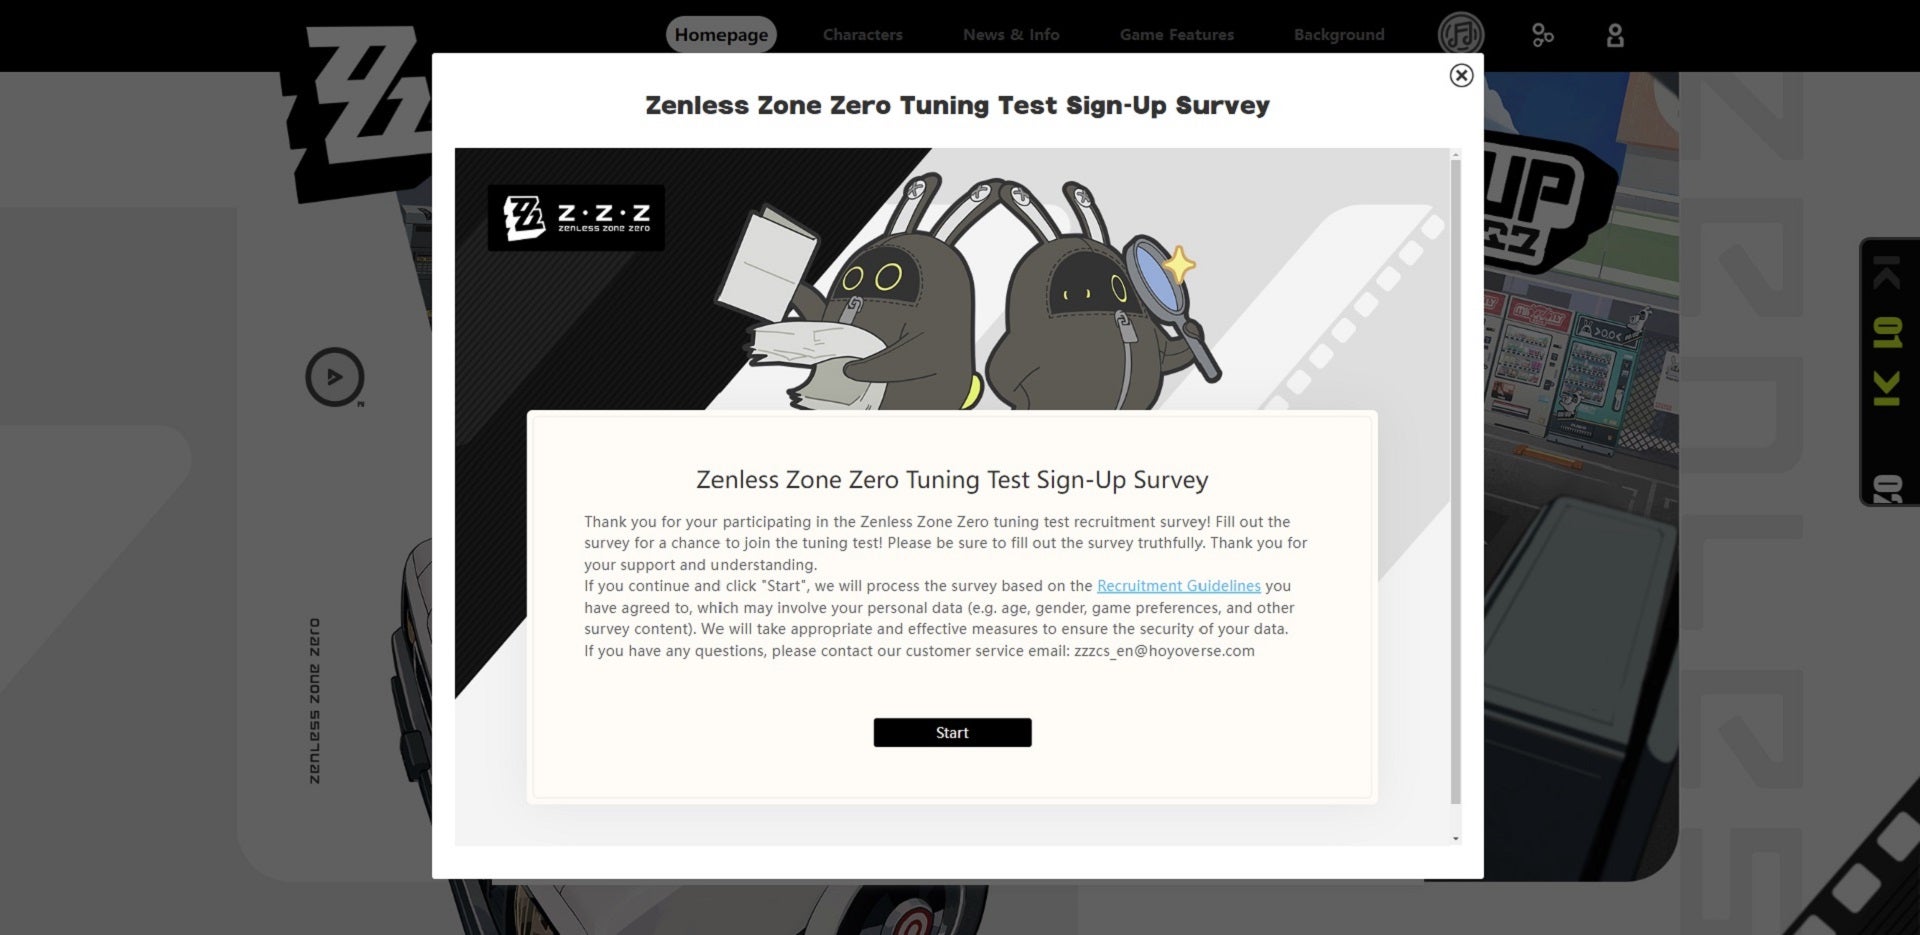 The Zenless Zone Zero beta tuning test survey start page, with a couple of MiHoYo bunnies highlighting links to additional information.